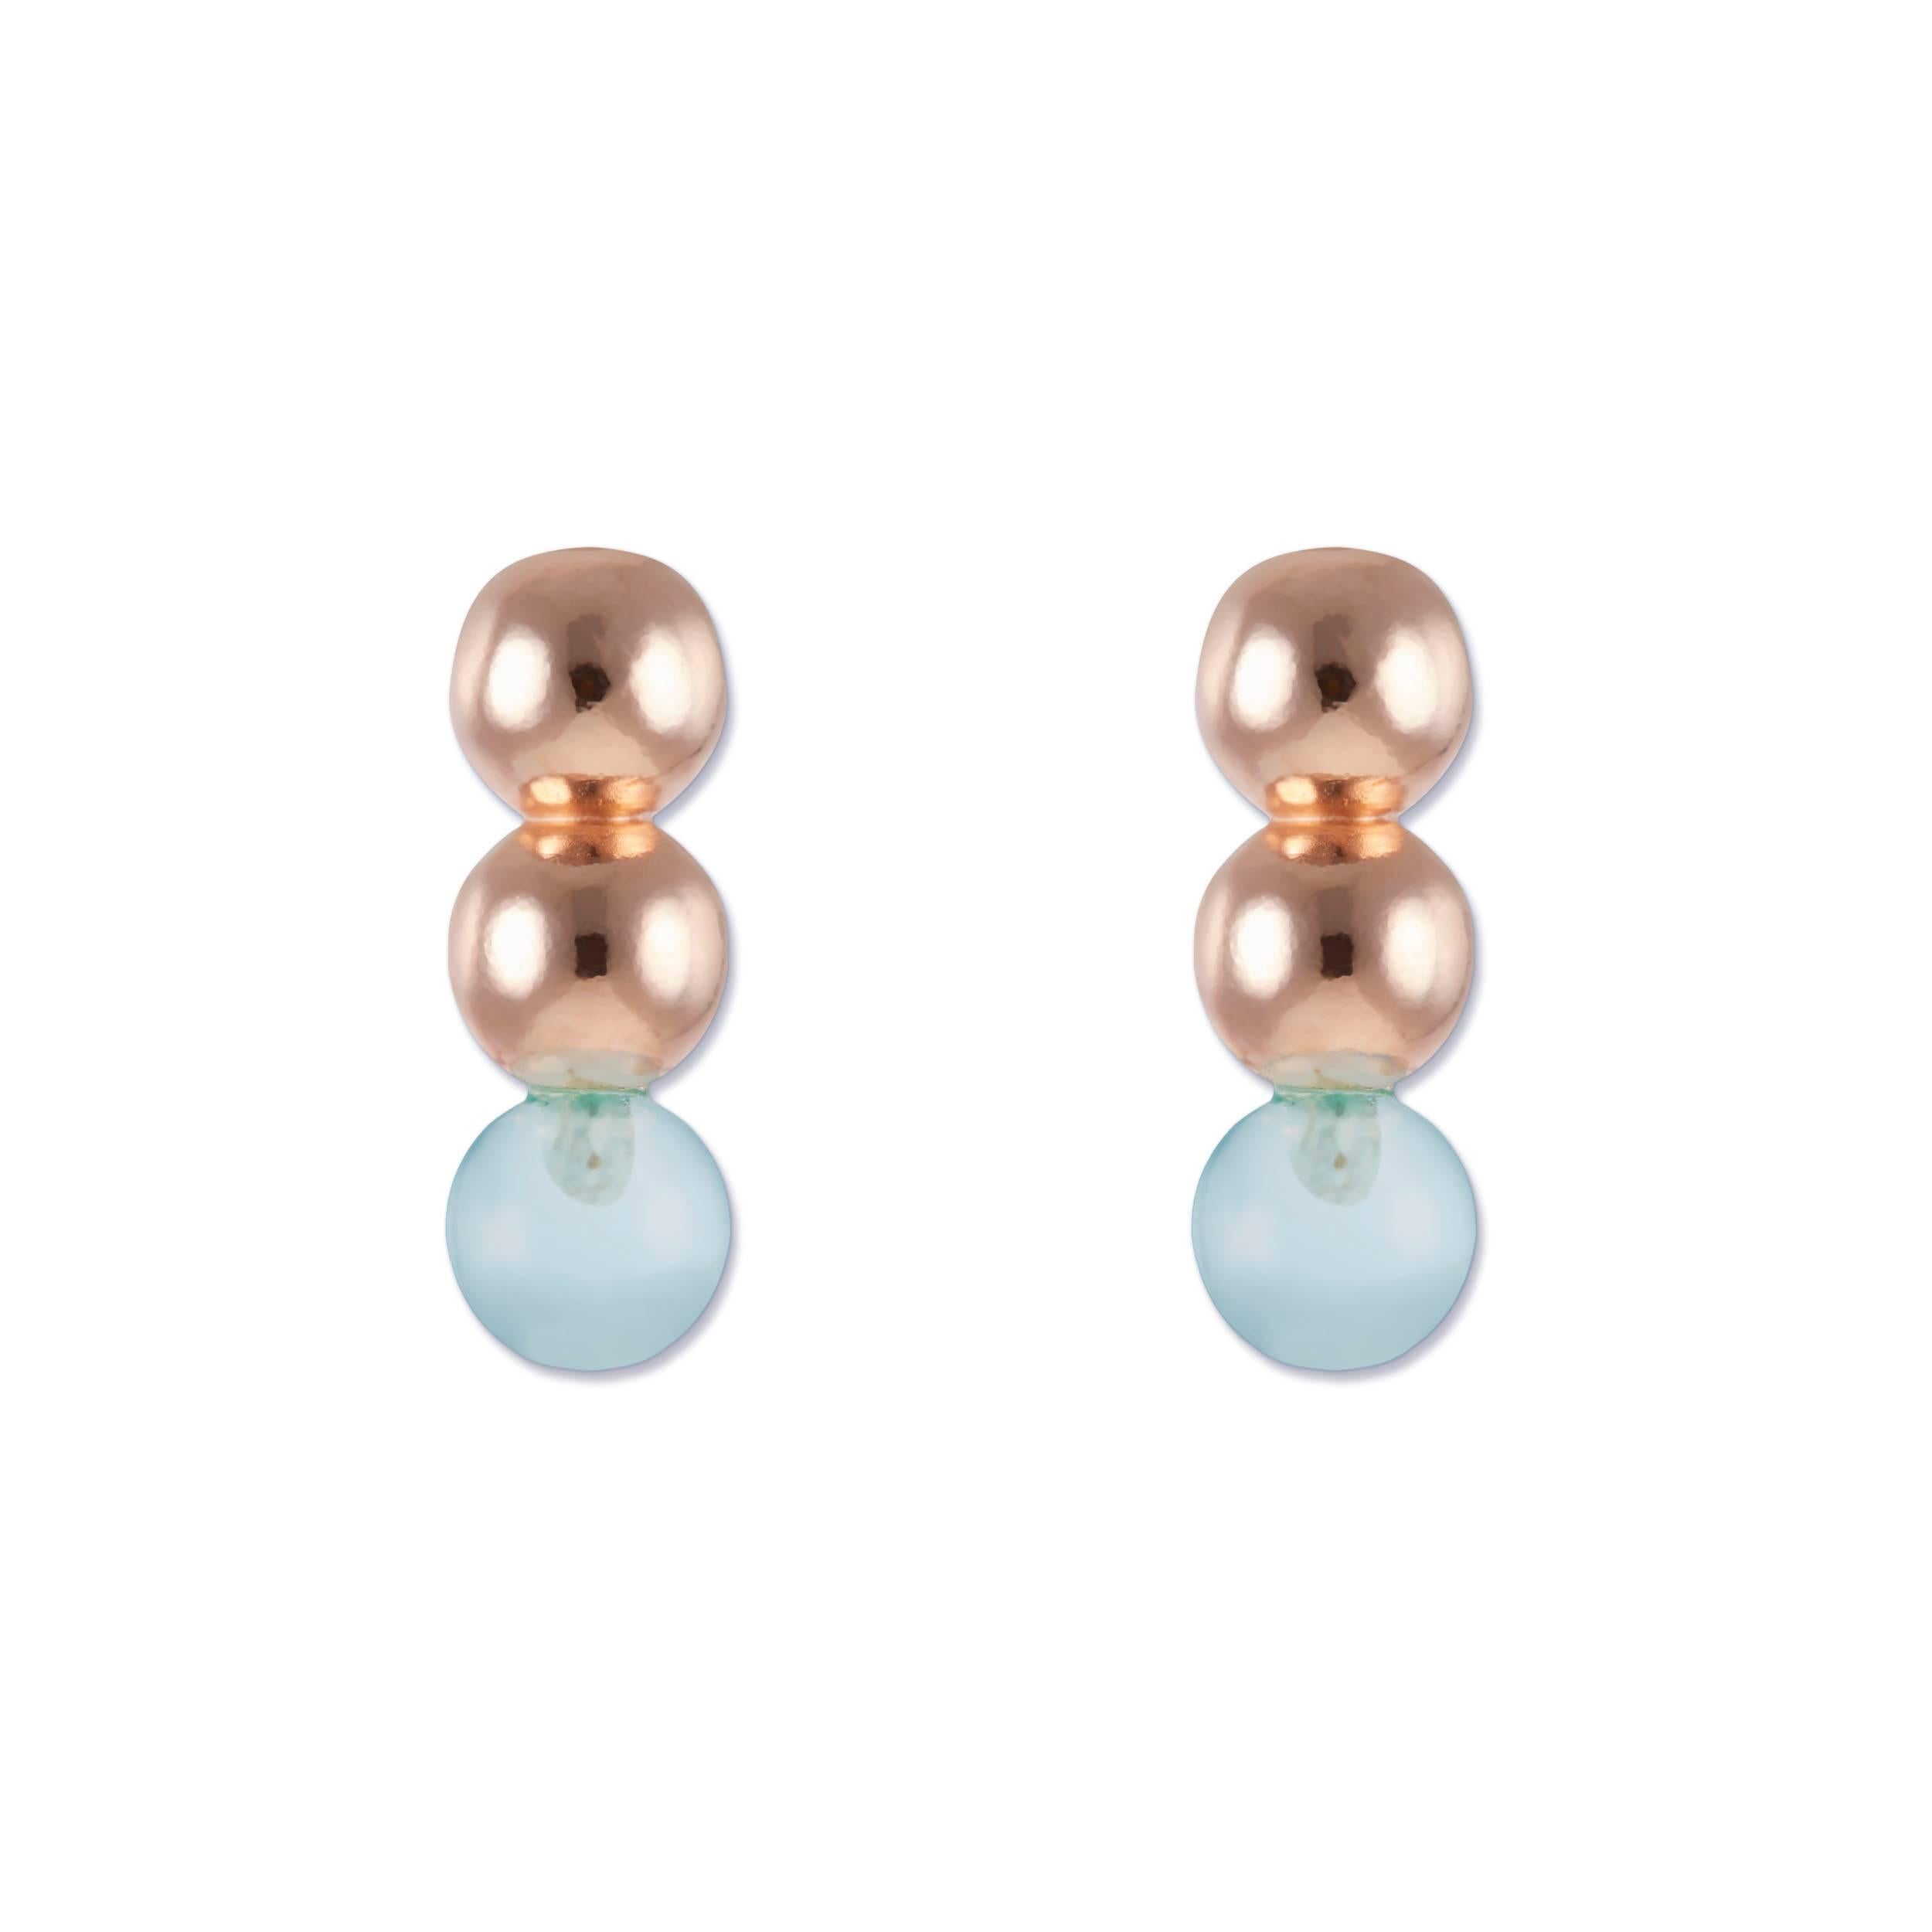 Three Ball 18 Karat Yellow Gold and Rose Gold Vermeil Stud in Pink Earrings 2